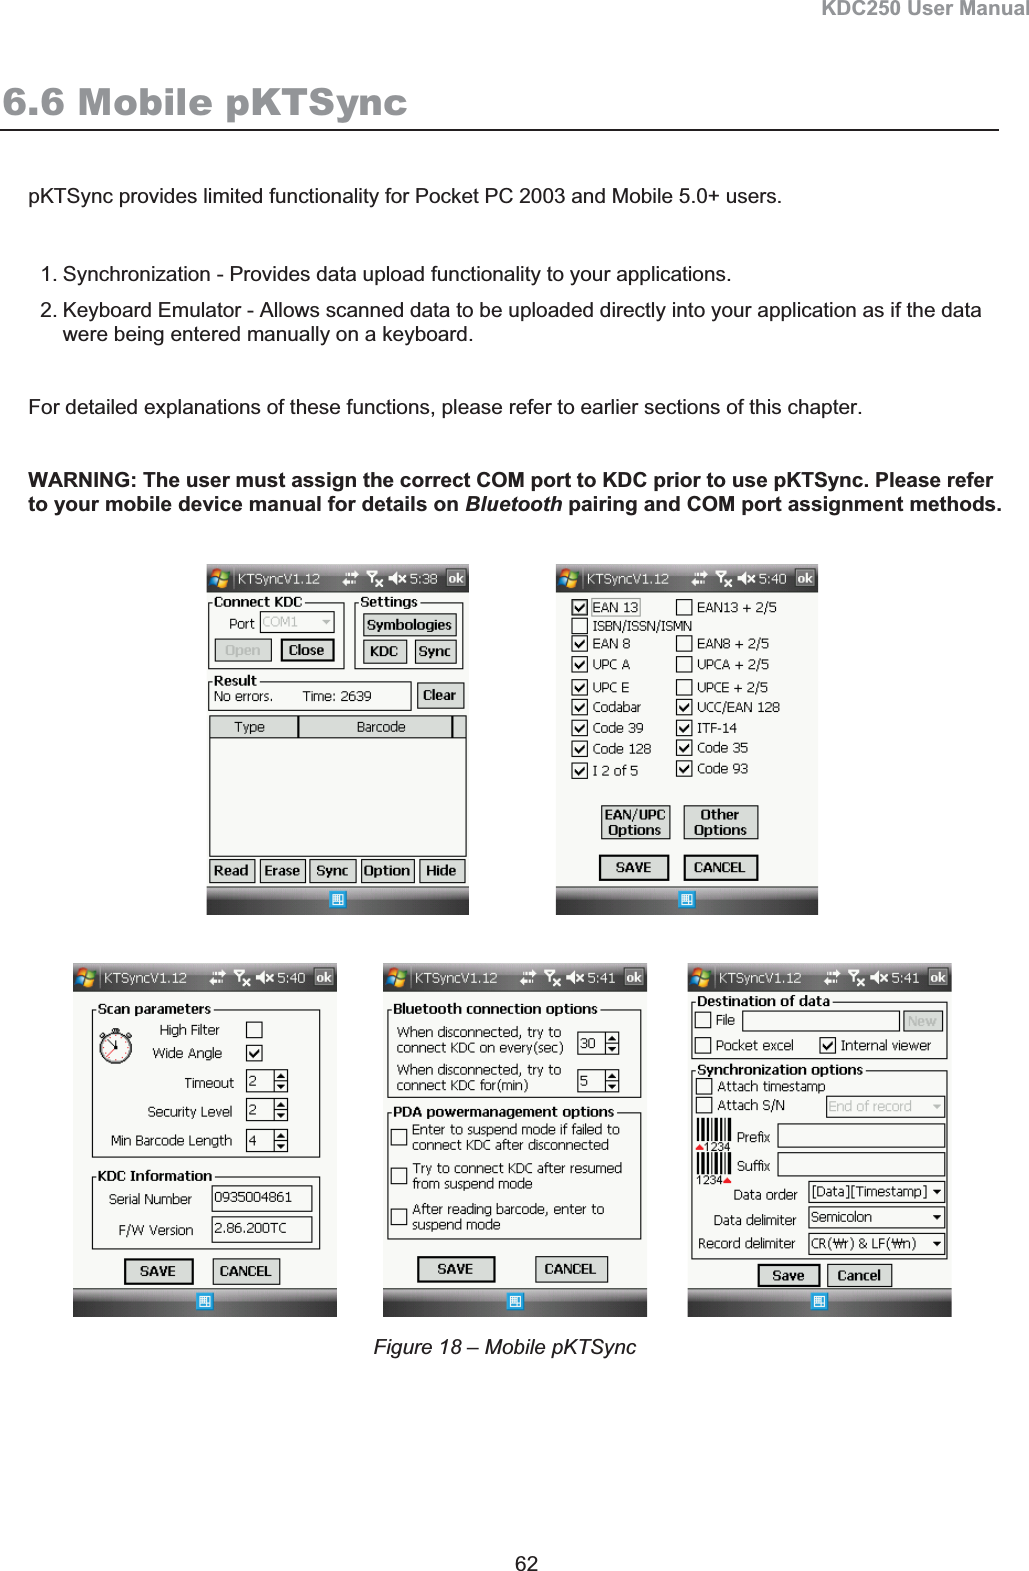 KDC250 User Manual 62 6.6 Mobile pKTSync pKTSync provides limited functionality for Pocket PC 2003 and Mobile 5.0+ users. 1. Synchronization - Provides data upload functionality to your applications. 2. Keyboard Emulator - Allows scanned data to be uploaded directly into your application as if the data were being entered manually on a keyboard. For detailed explanations of these functions, please refer to earlier sections of this chapter.  WARNING: The user must assign the correct COM port to KDC prior to use pKTSync. Please refer to your mobile device manual for details on Bluetooth pairing and COM port assignment methods.                                Figure 18 – Mobile pKTSync 